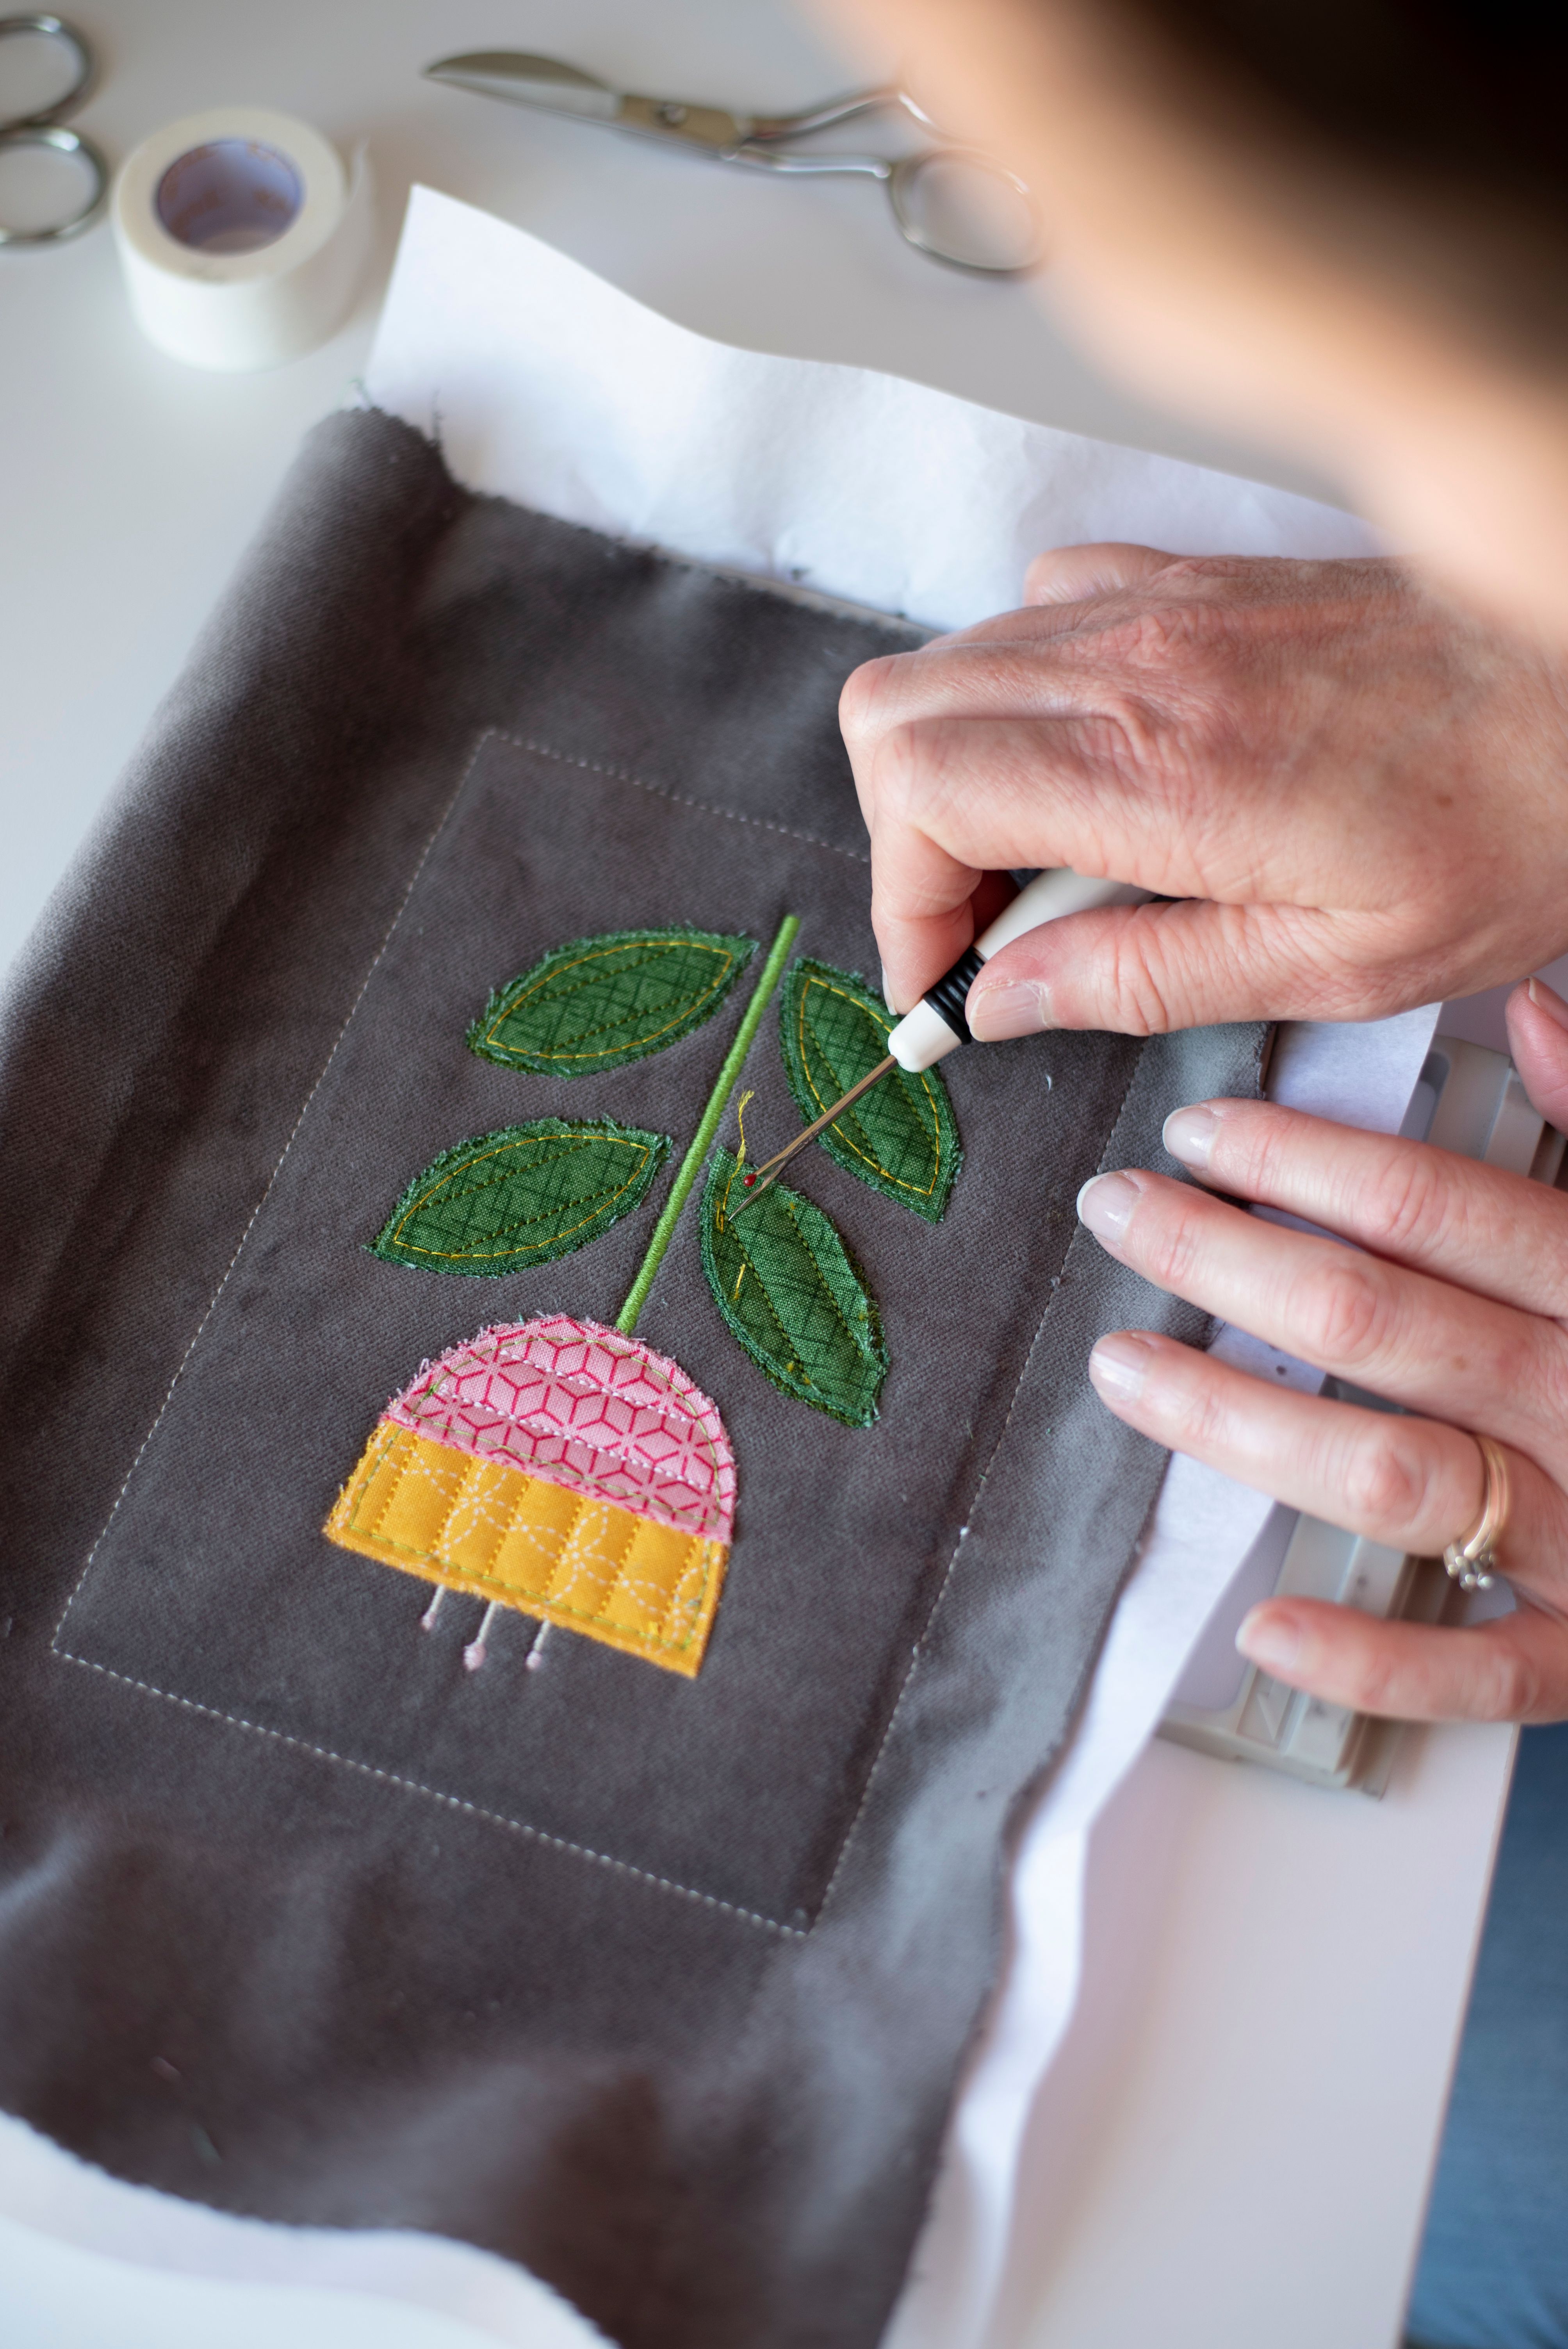 How to Chenille Your Machine Embroidery Projects